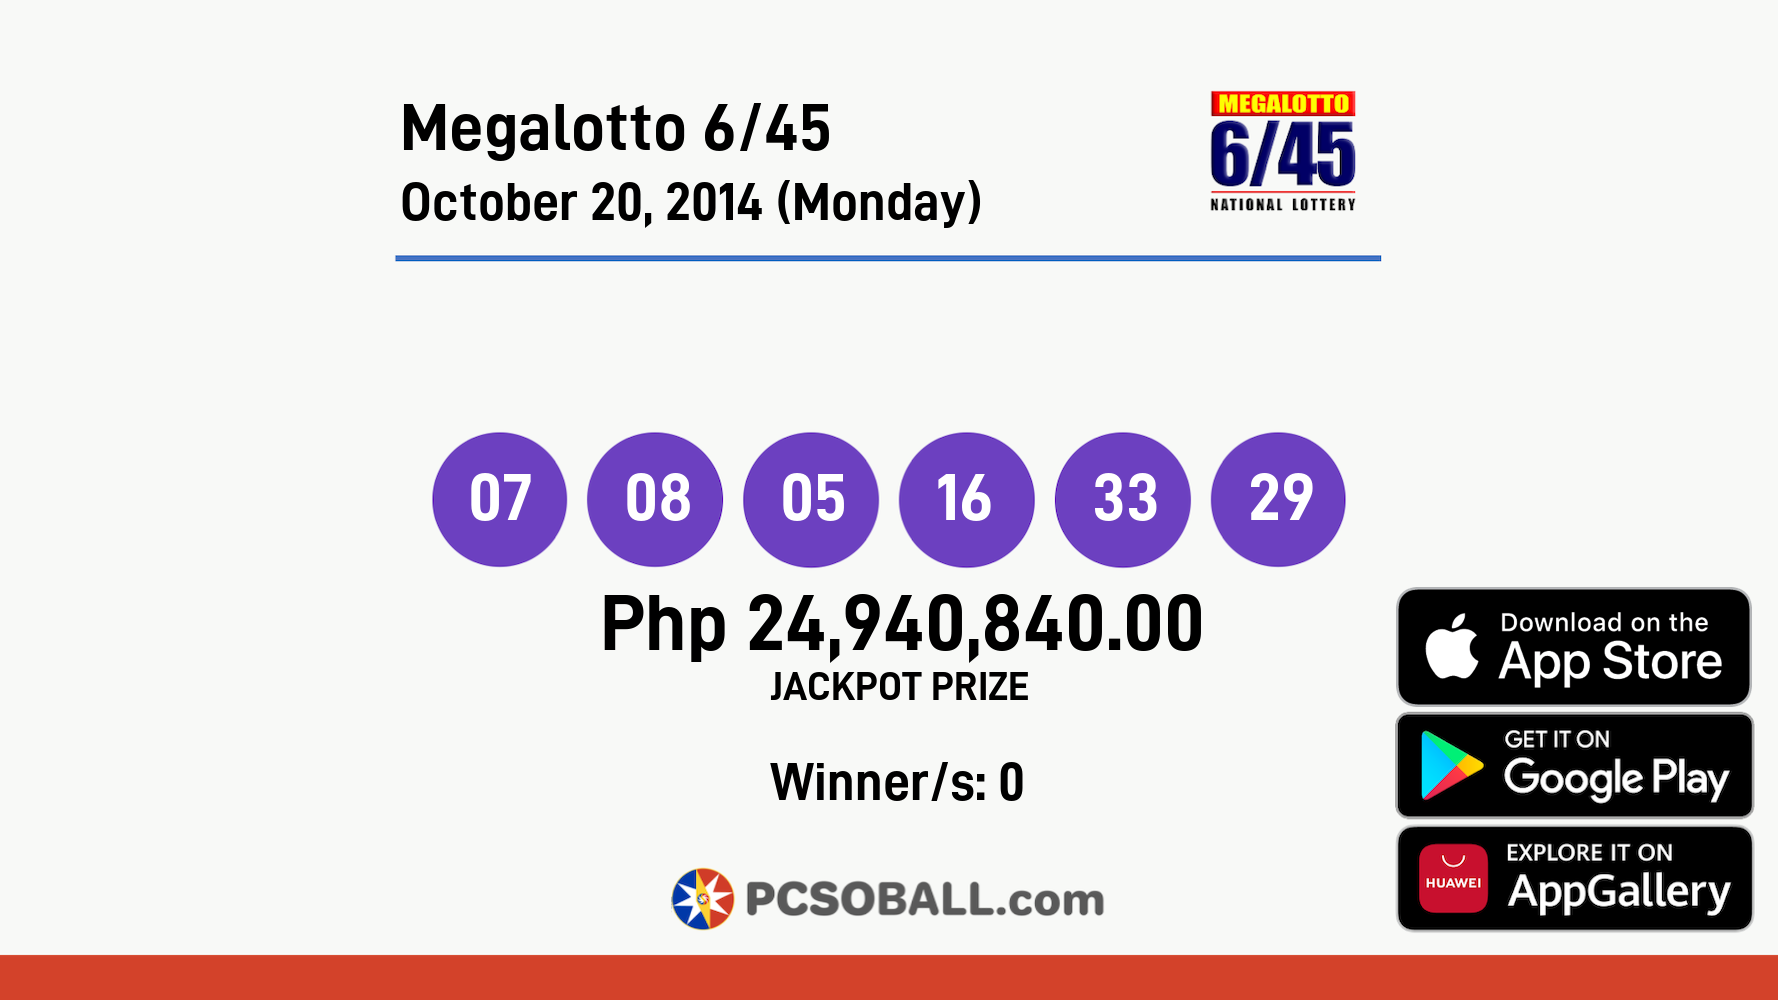 Megalotto 6/45 October 20, 2014 (Monday) Result